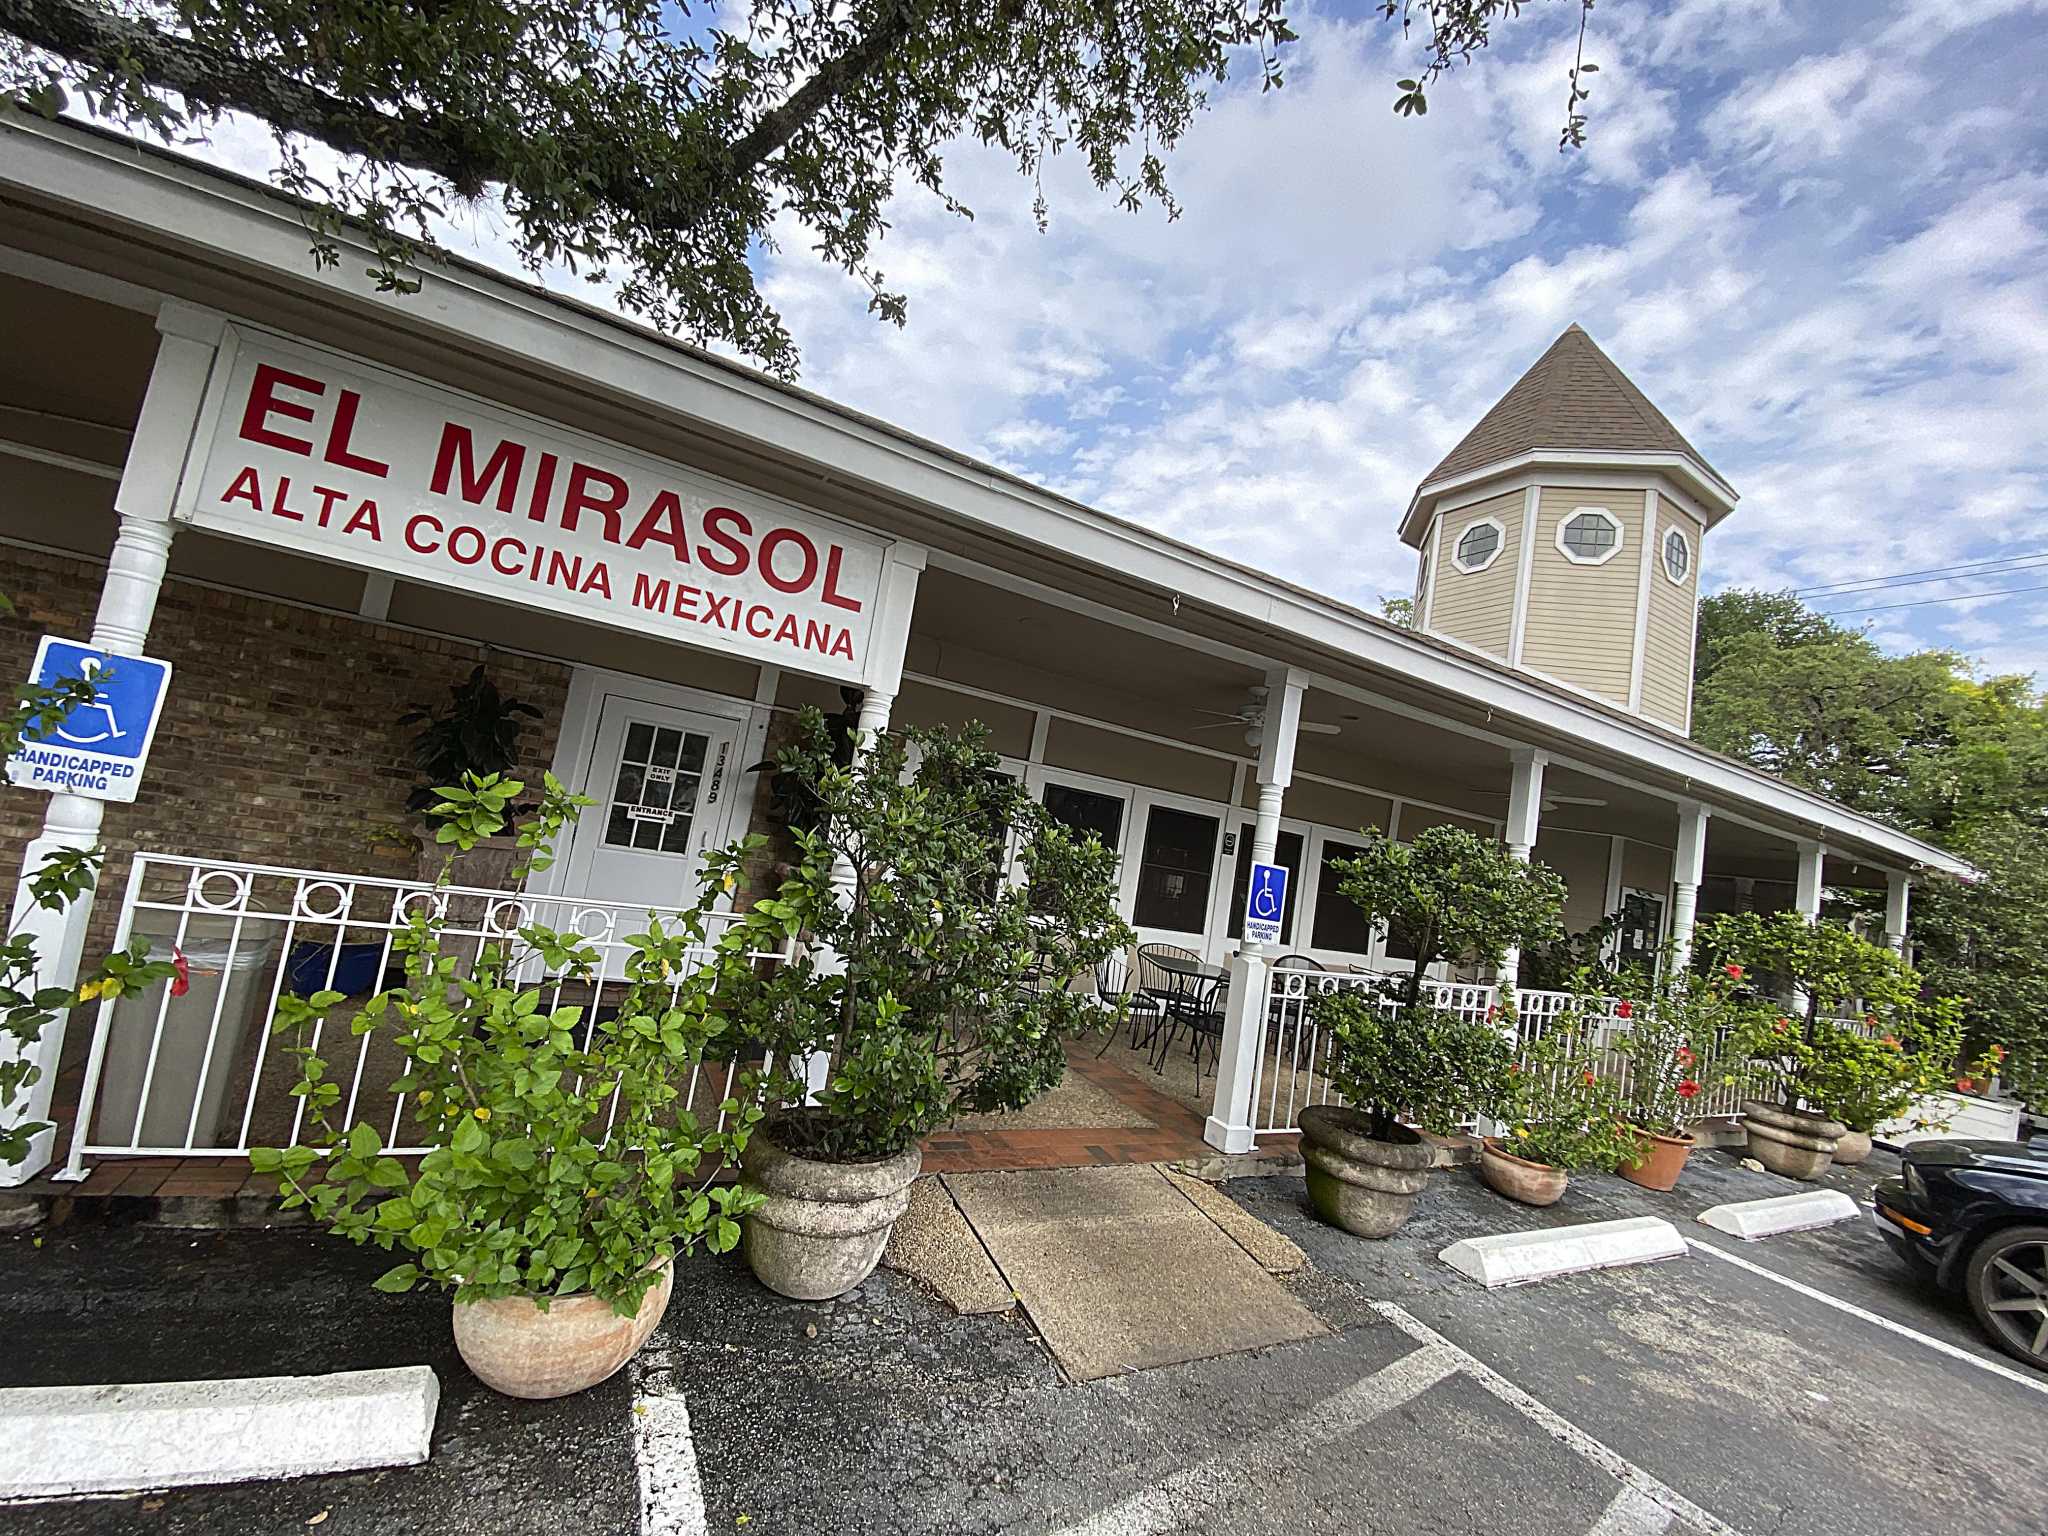 El Mirasol Mexican restaurant on Blanco to close soon, but owners will open new spot on Loop 1604 near Stone photo